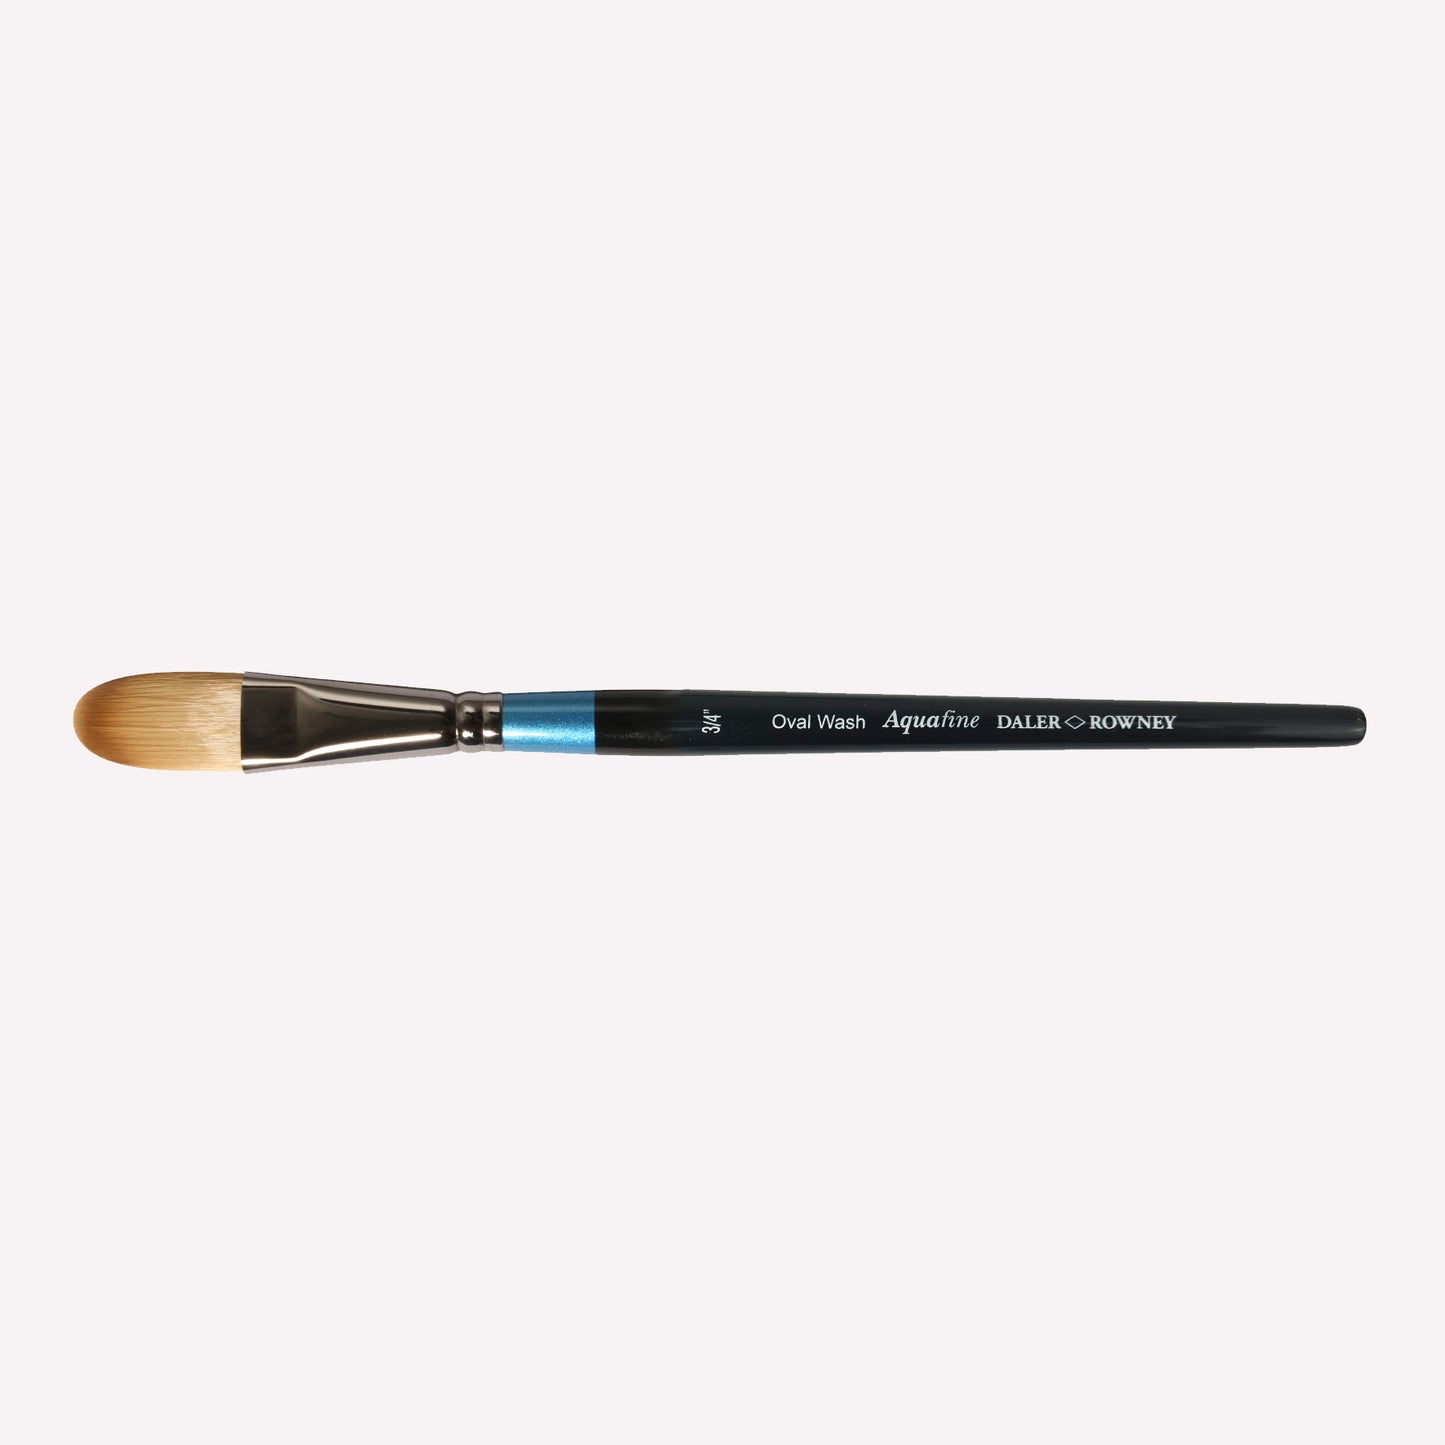 Daler Rowney Aquafine flat shader paintbrush in size 3/4”. The  filaments have a oval shape, perfect for washes of colour and creating smooth gradients. Brushes have a classy black handle with blue detailing and a silver ferrule.